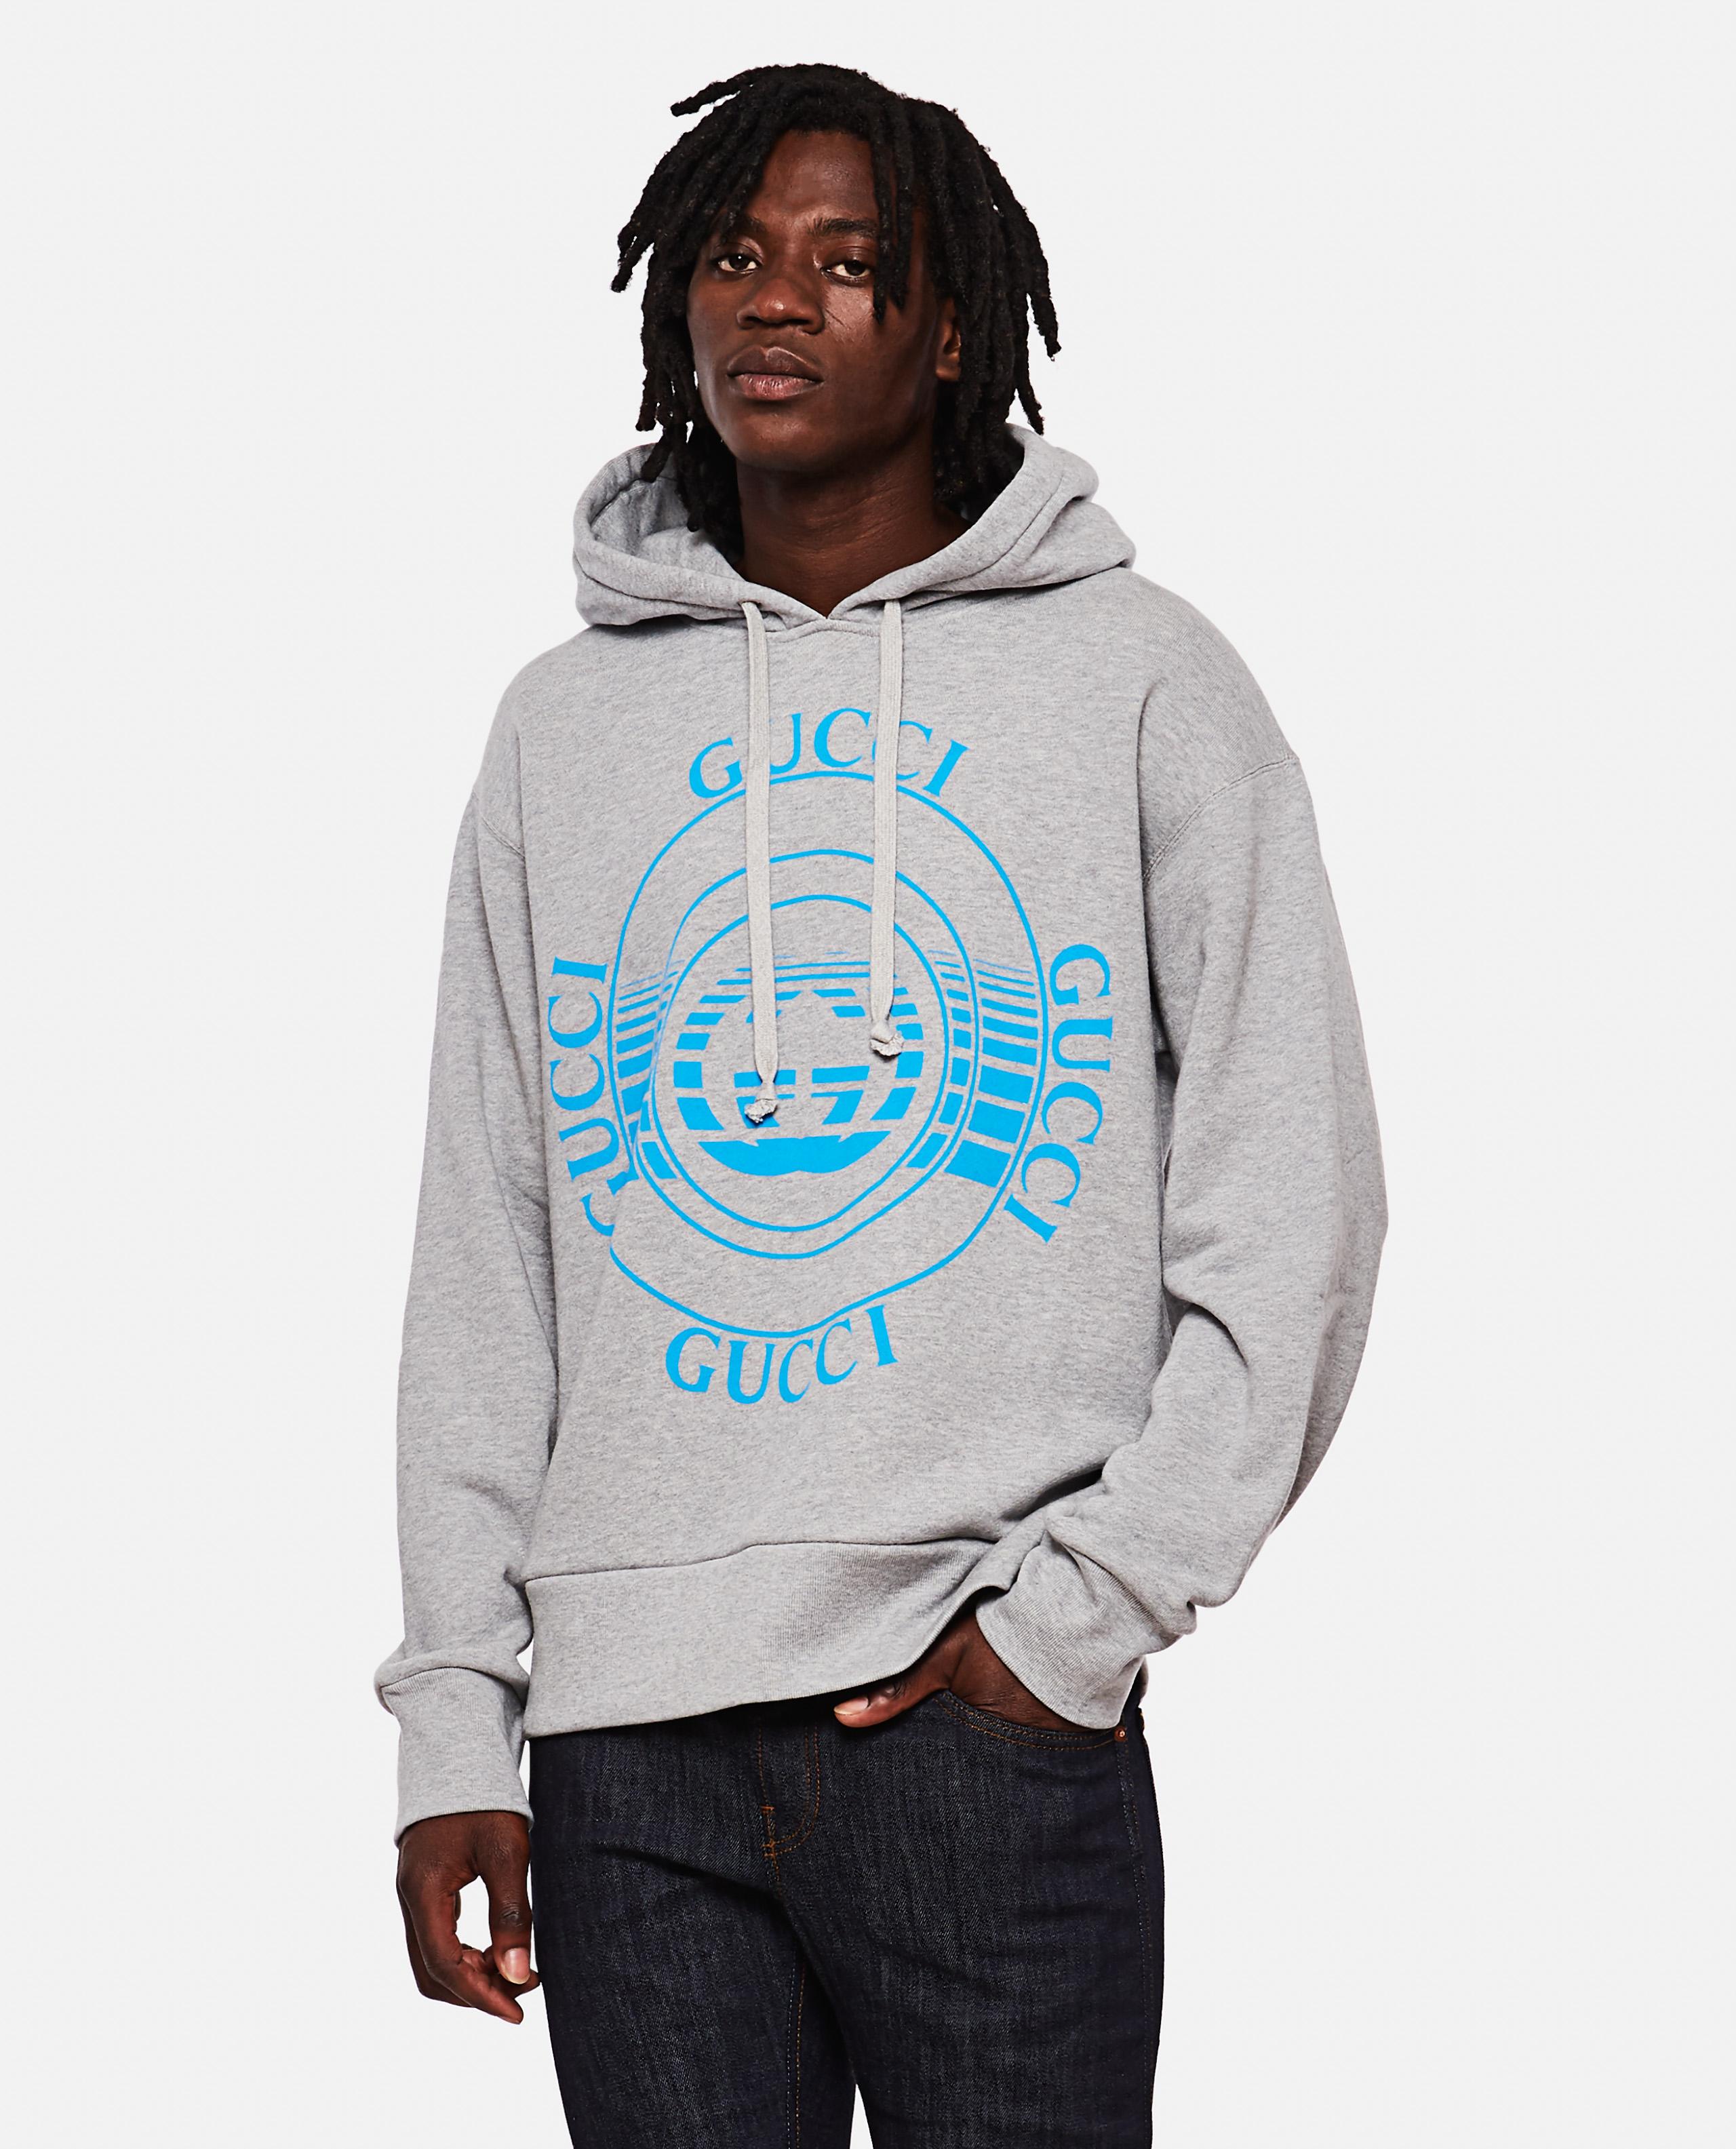 Gucci Oversized Sweatshirt With Disco Print in Grey (Gray) for Men - Lyst